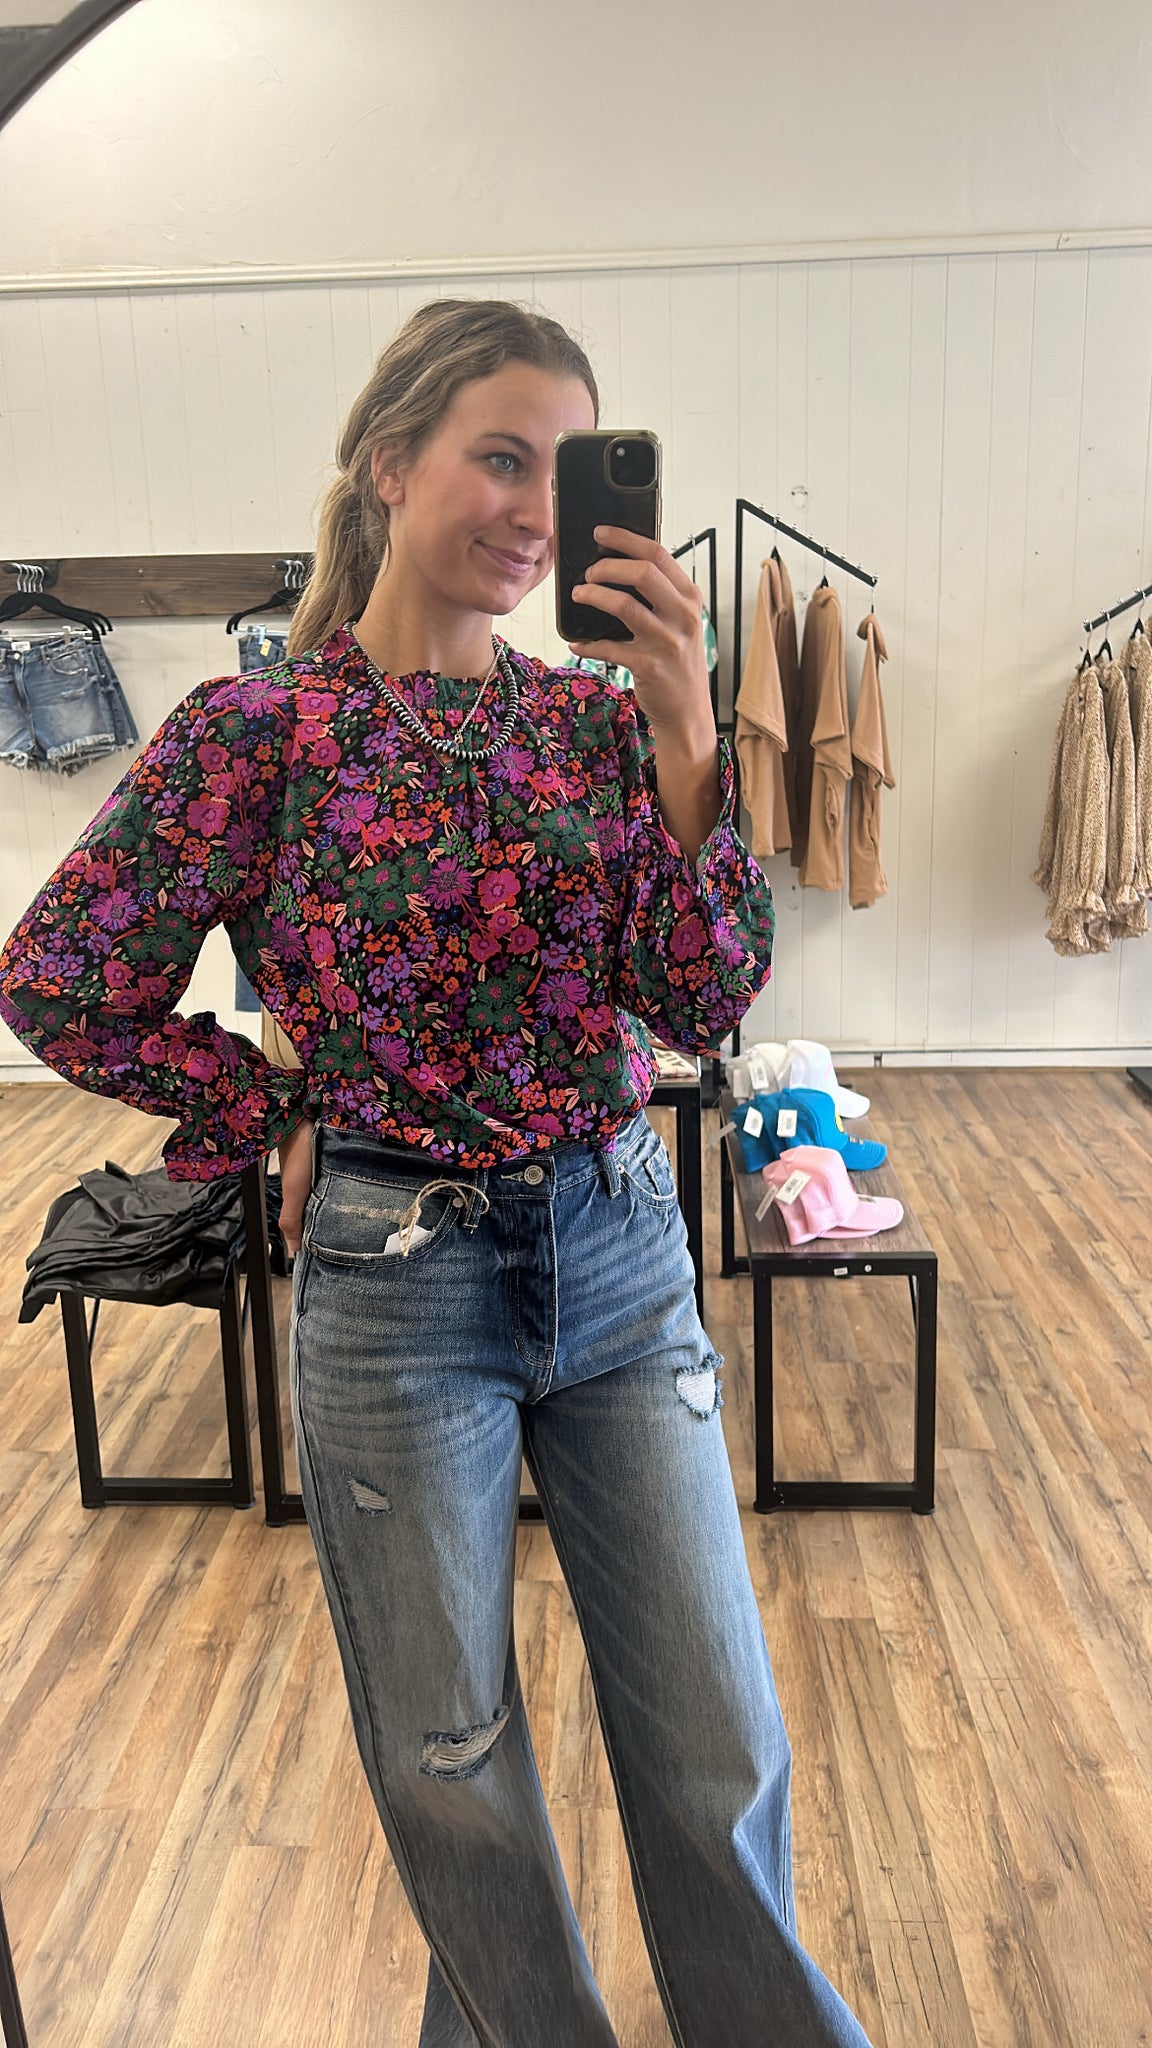 The Floral Top